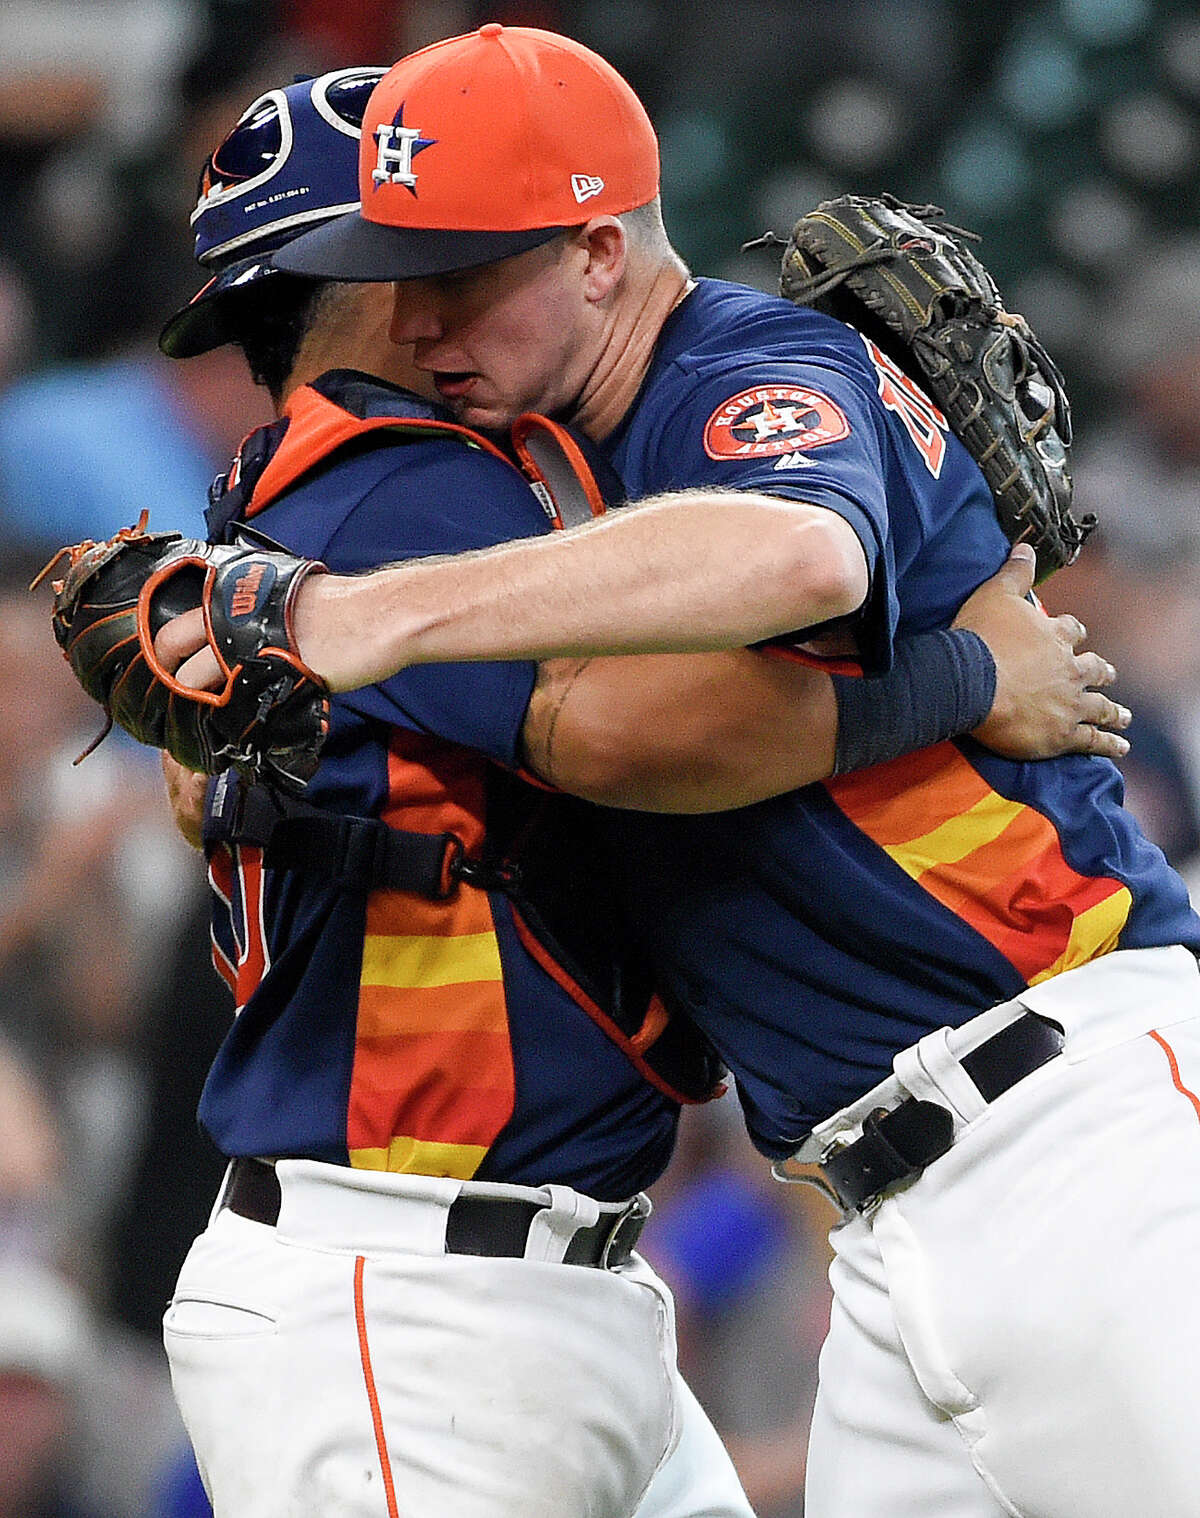 Houston Astros relief pitcher Chris Devenski, right, hugs catcher Juan Centeno after their win over the New York Mets in a baseball game, Sunday, Sept. 3, 2017, in Houston. (AP Photo/Eric Christian Smith)